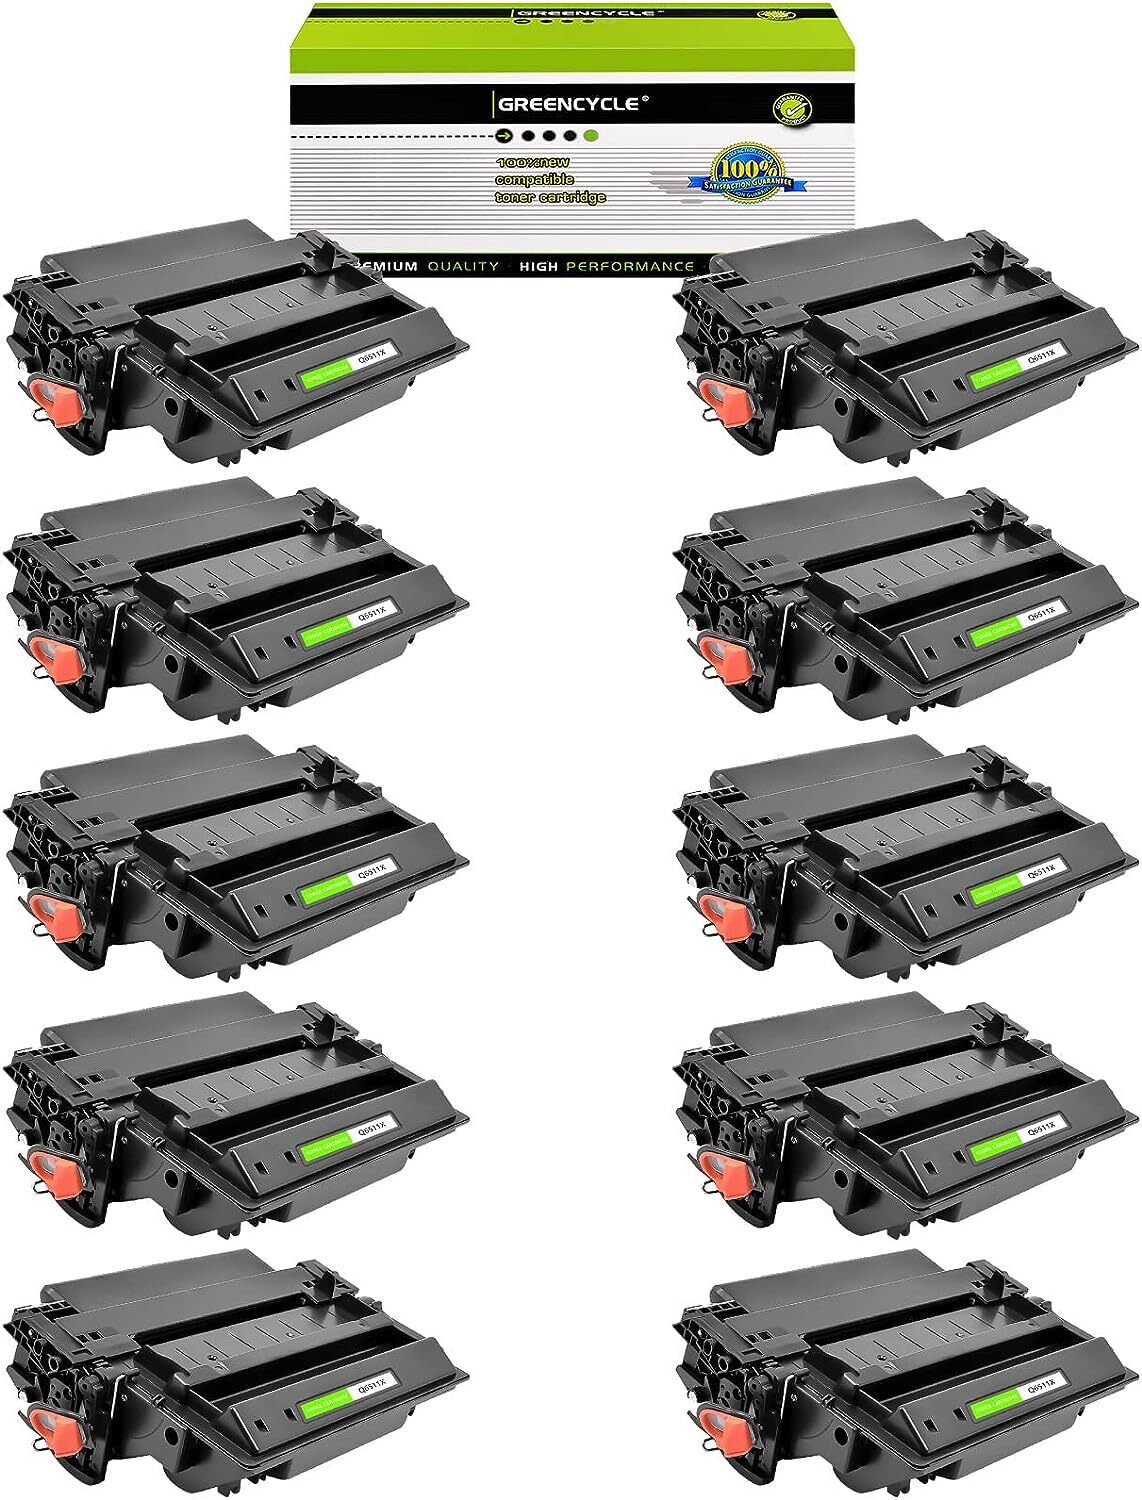 10PK Greencycle Compatible Toner fit for HP 11X Q6511X use in LaserJet 2400/2410